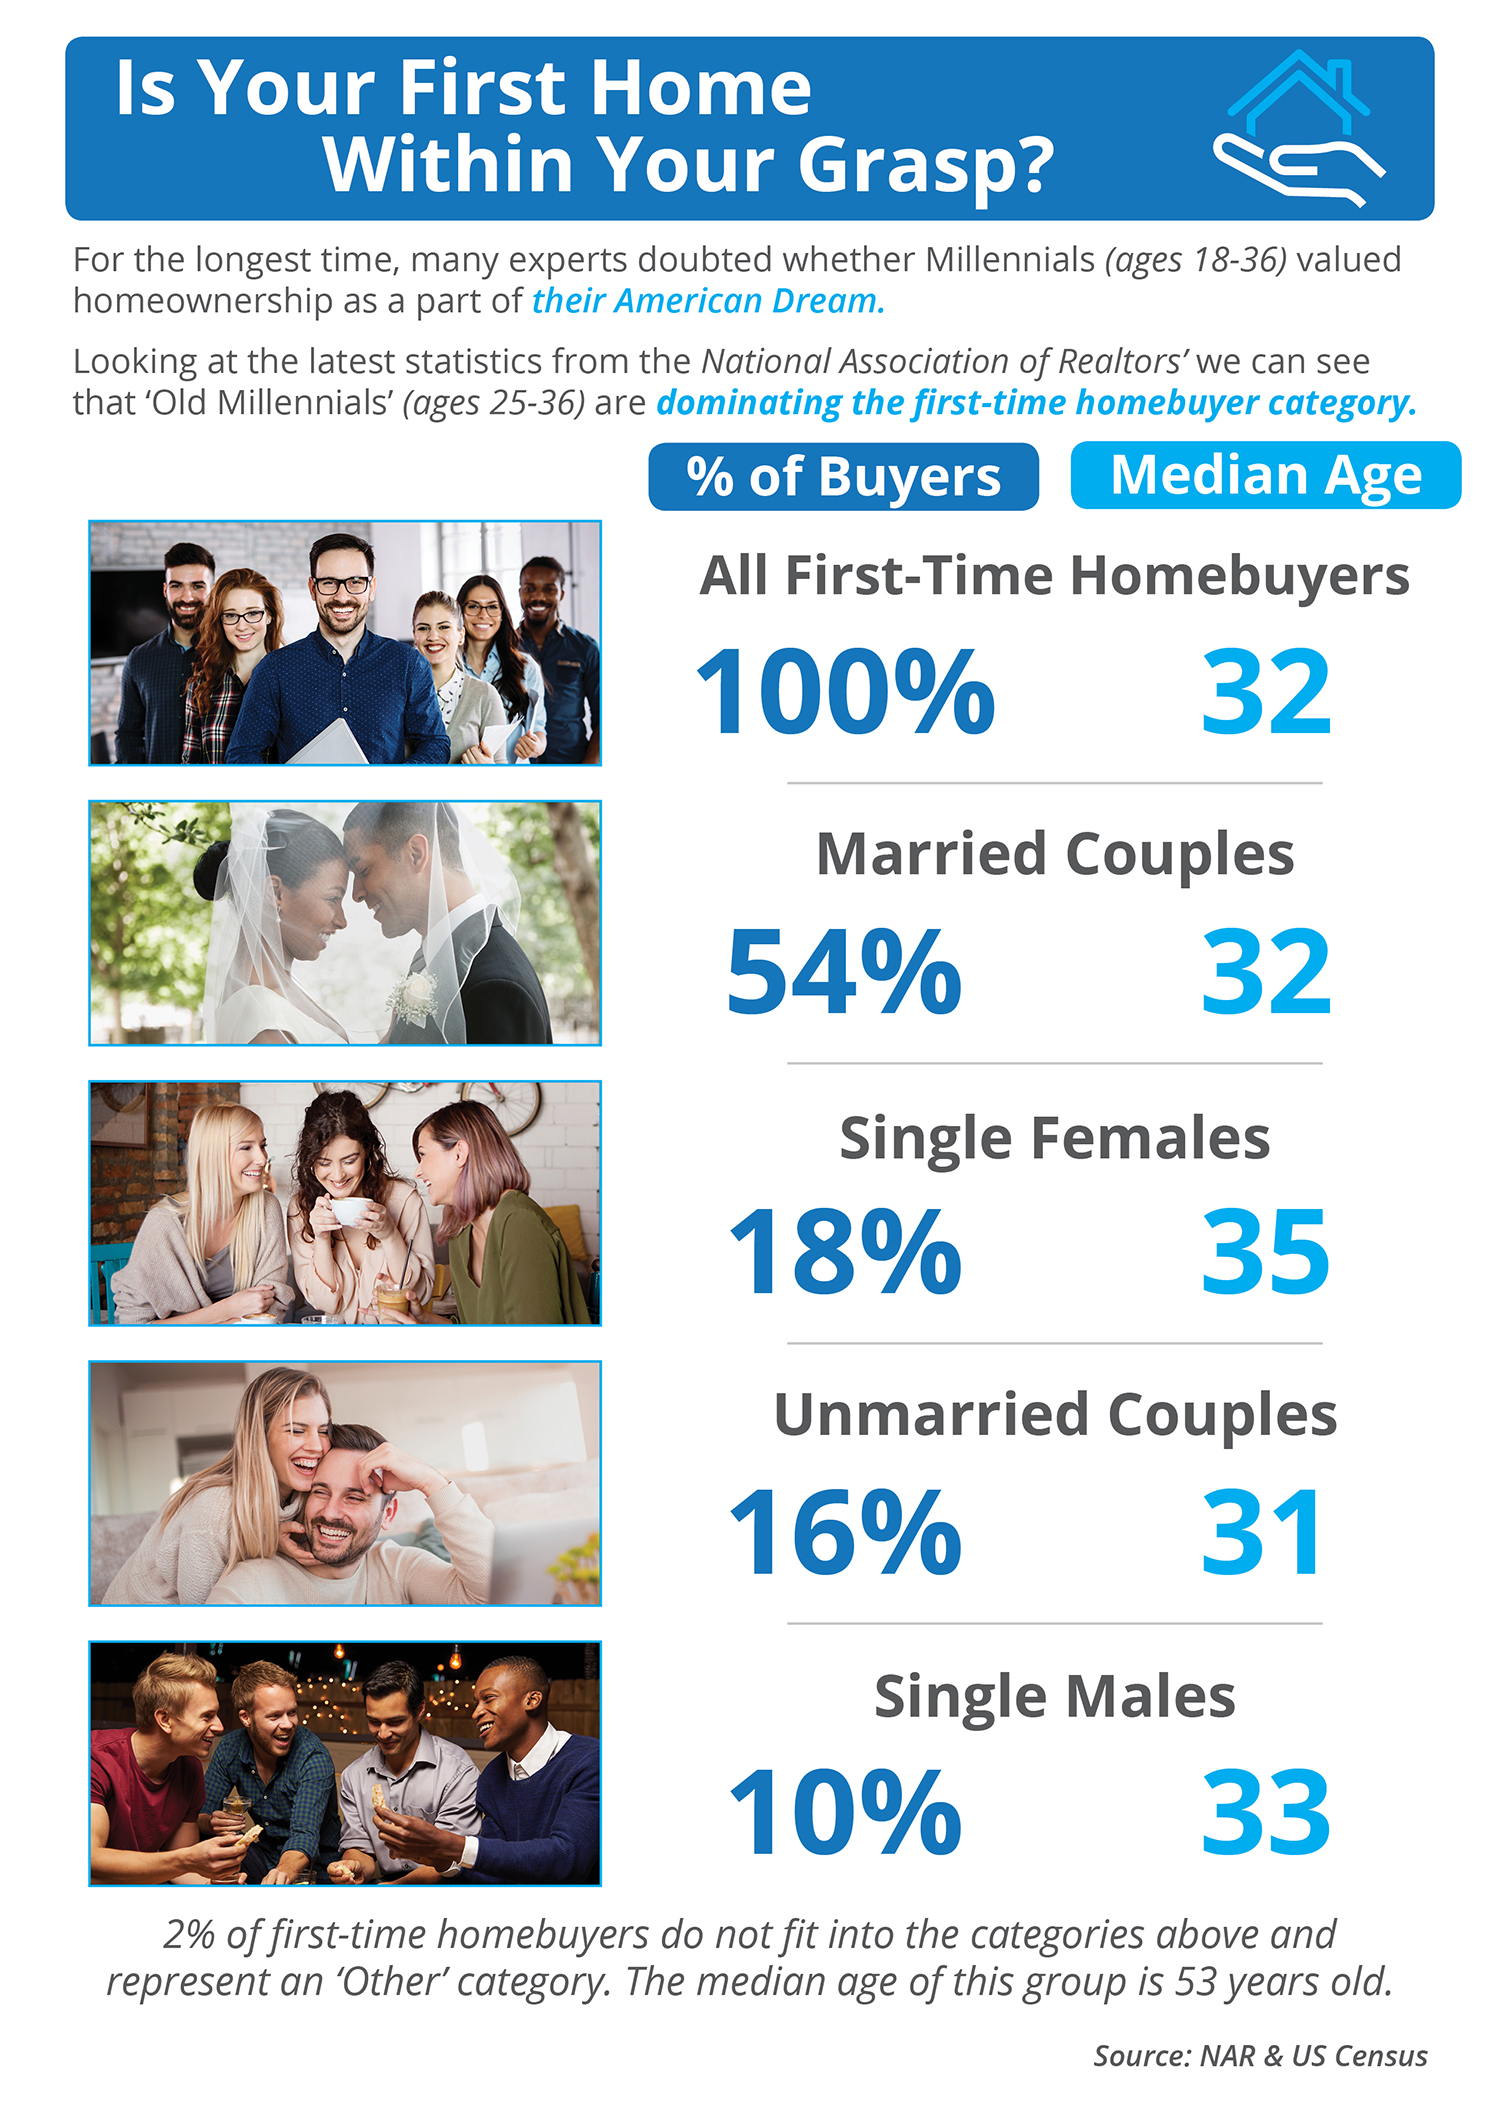 Is Your First Home Now Within Your Grasp? [INFOGRAPHIC] | MyKCM